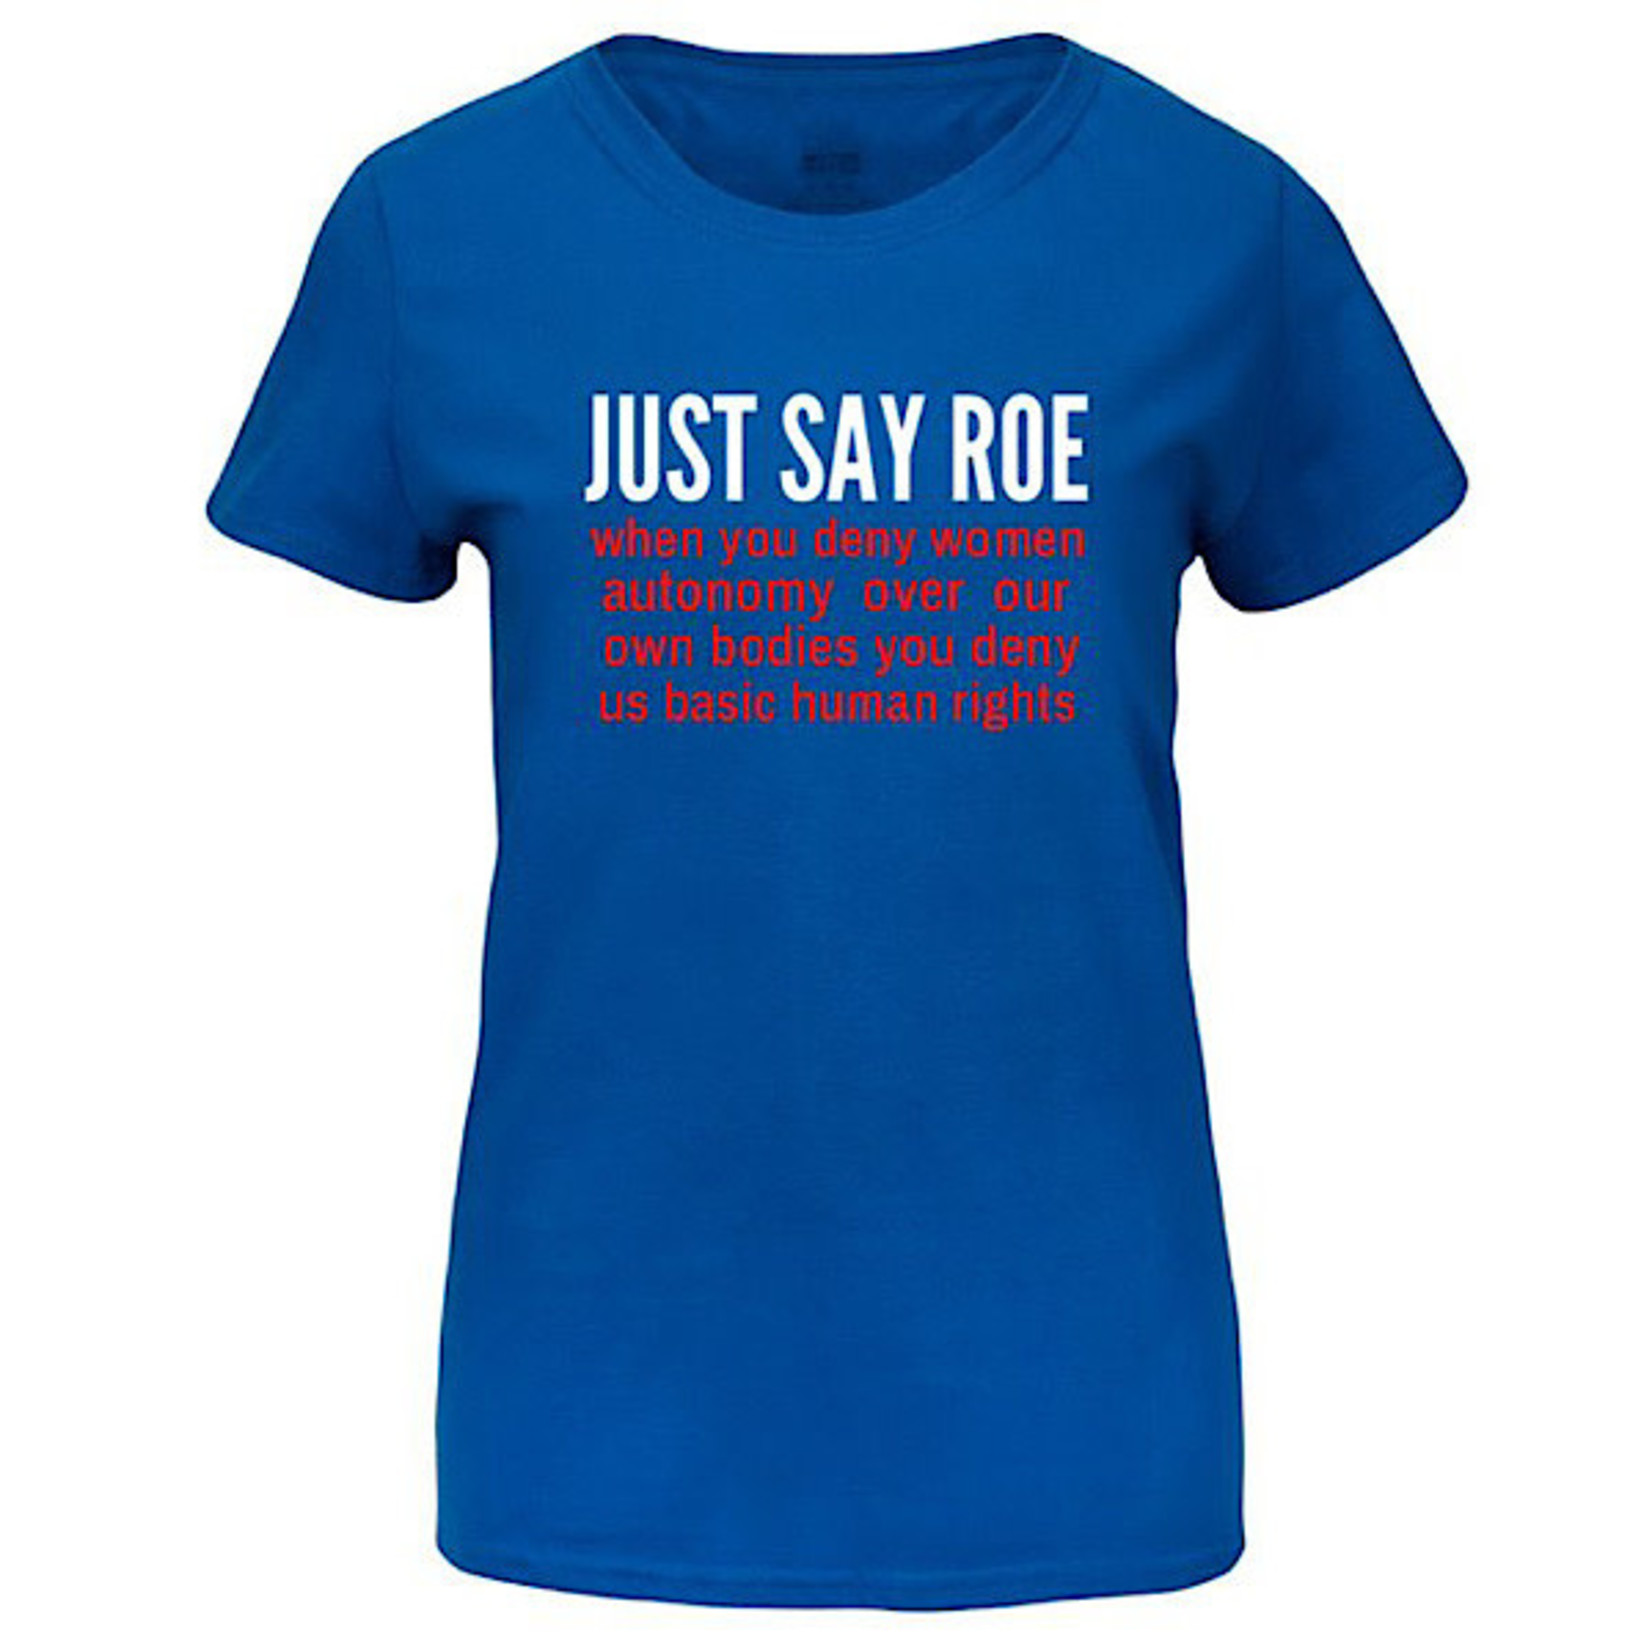 Bad Annie’s T-Shirt - Just Say Roe